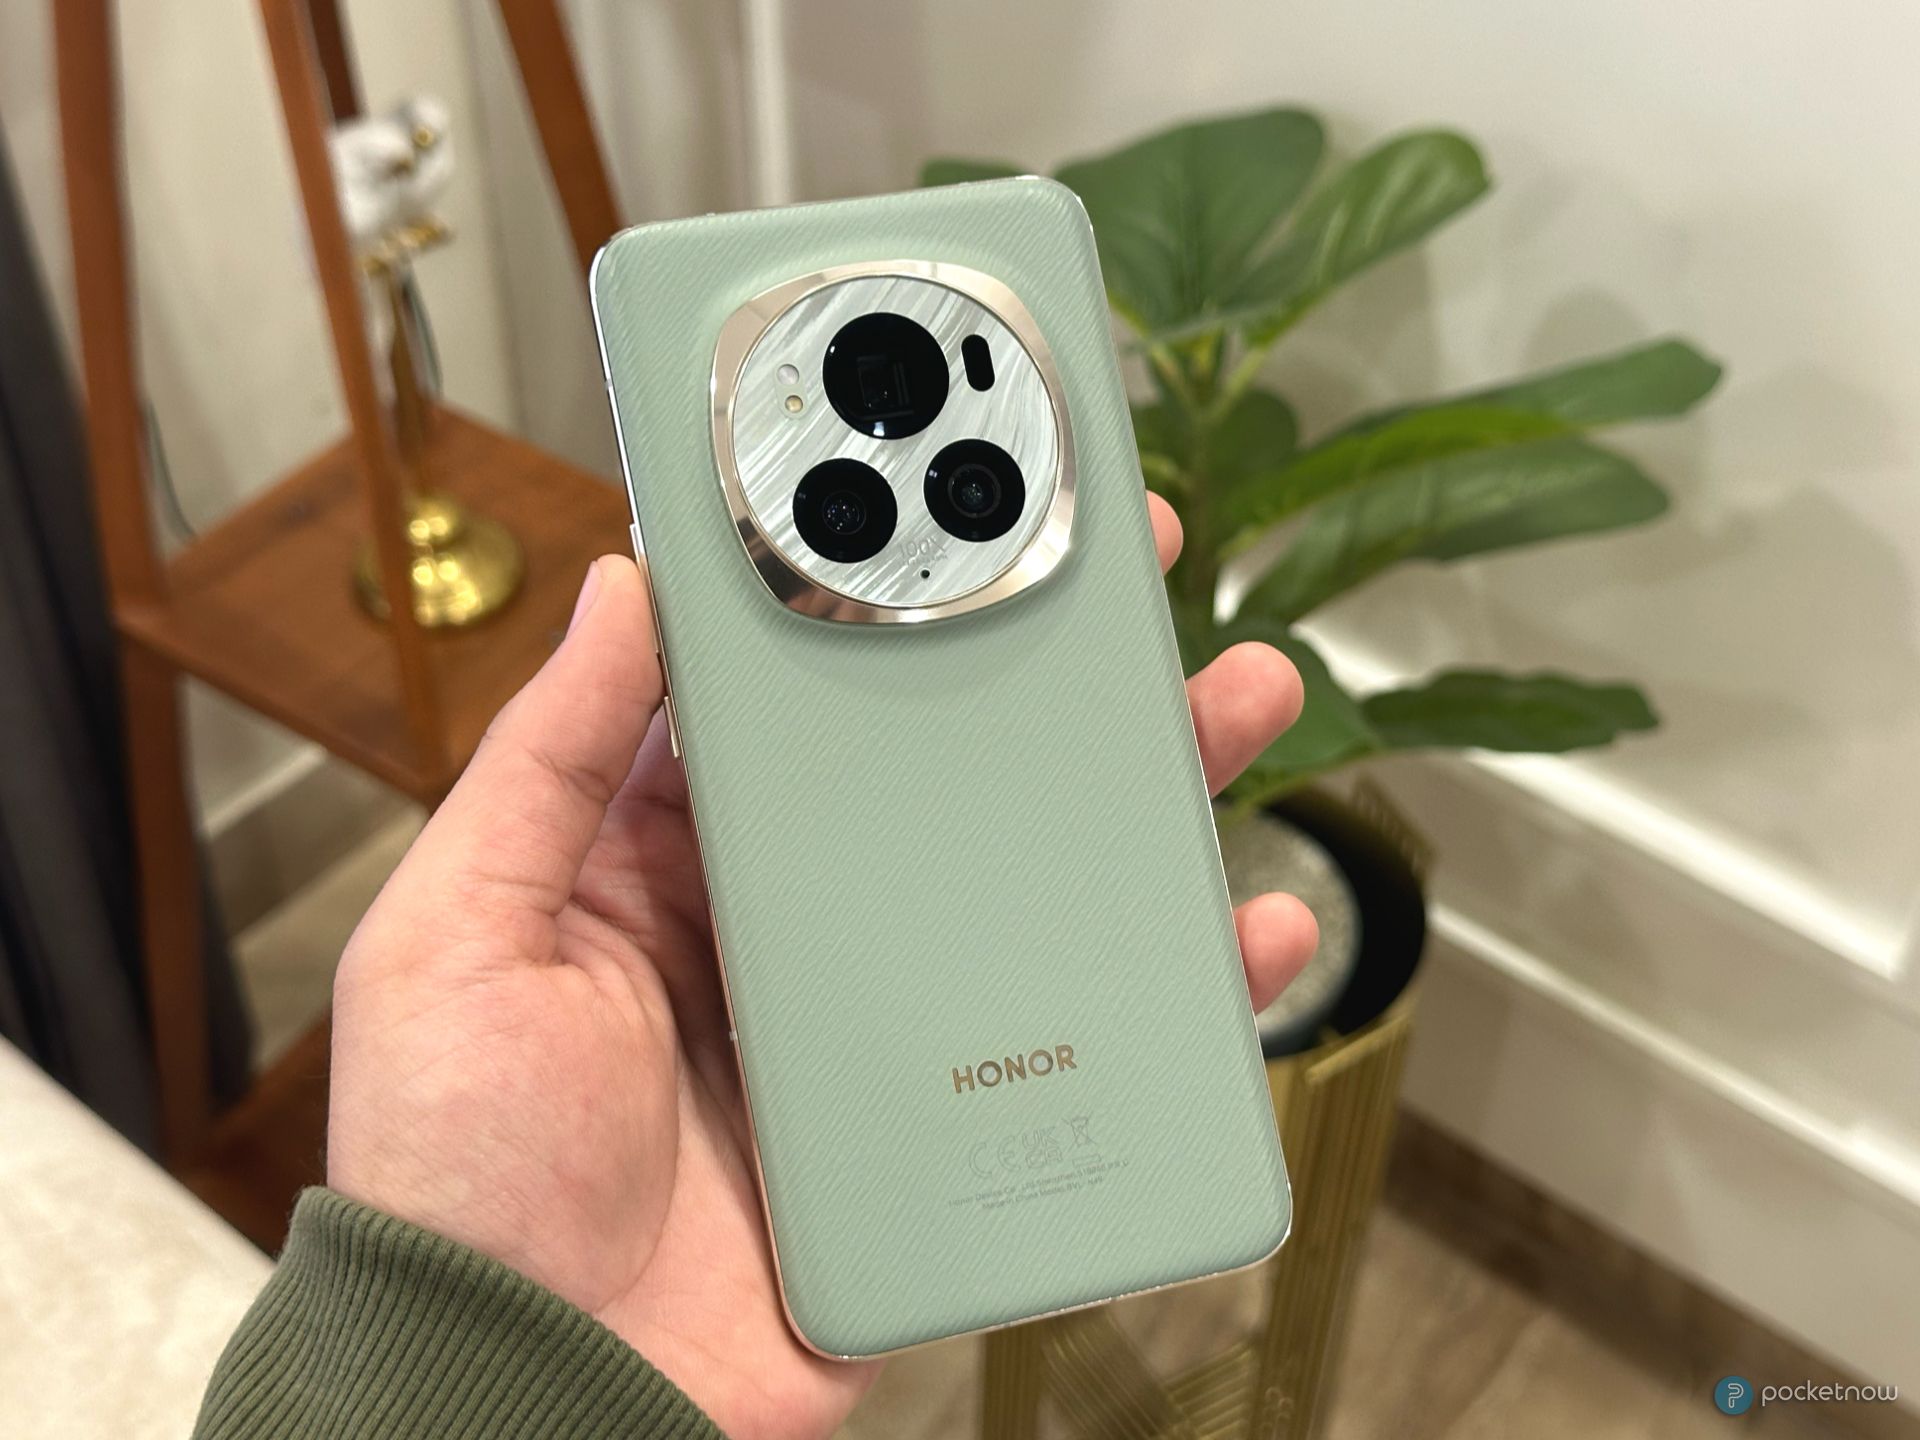 HONOR Magic 6 Pro: First impression of HONOR's new flagship smartphone